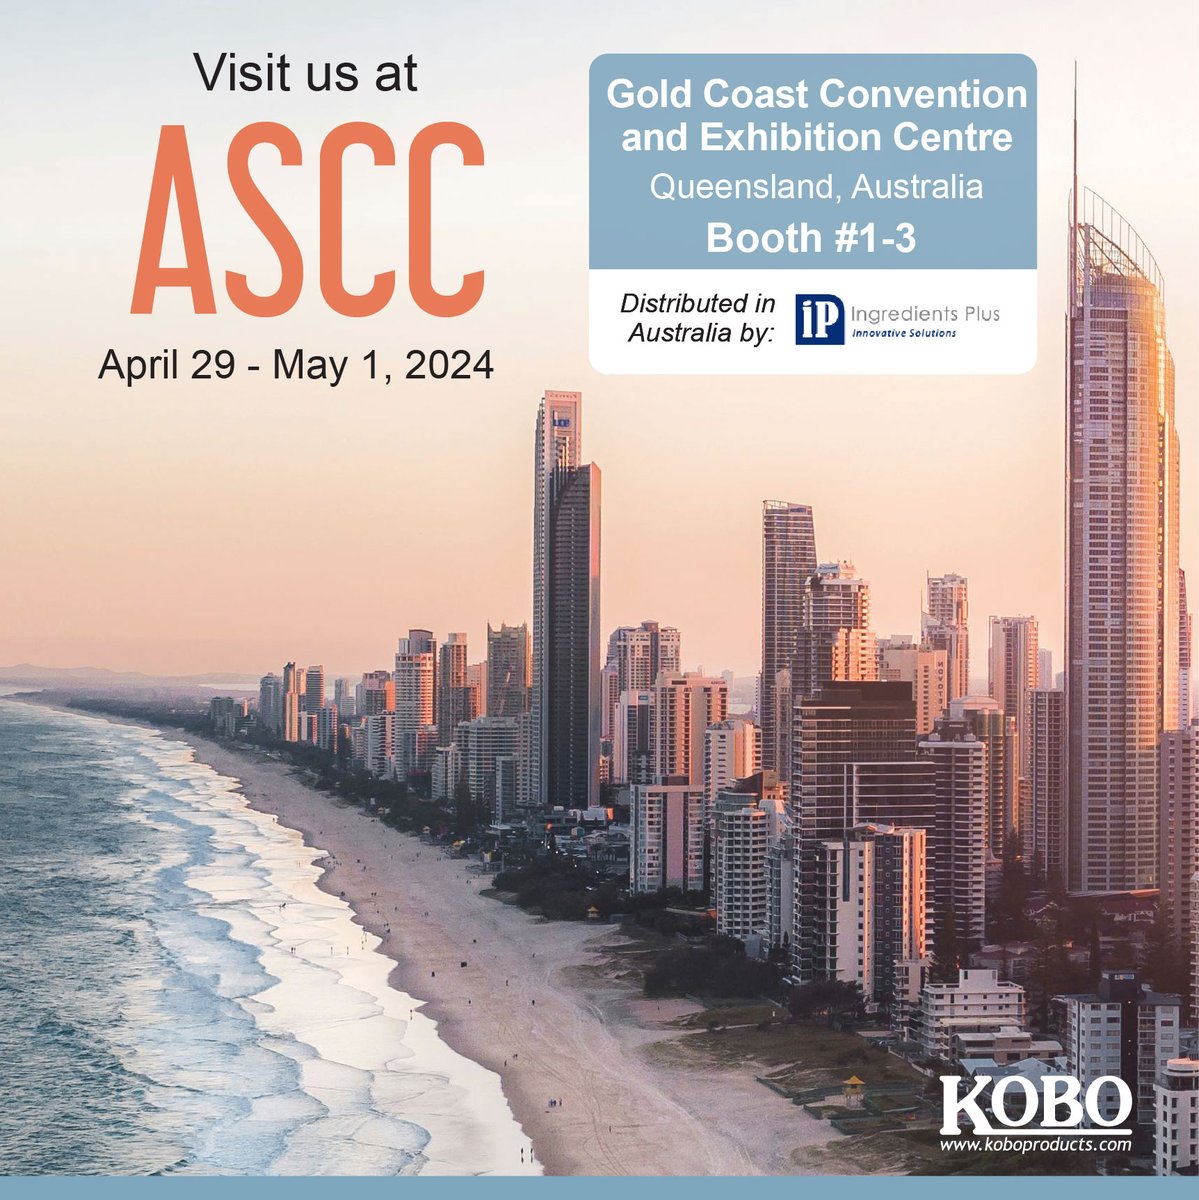 Headed to ASCC in the Gold Coast next week? Swing by booths 1-3 for a first look at our latest products and formulas! We can't wait to see you there. 🌞 

#ASCC2024 #ASCC #KoboProductsInc #KoboProducts #Kobo #Cosmetics #CosmeticSupplier #Beauty #Makeup #CosmeticRawMaterials